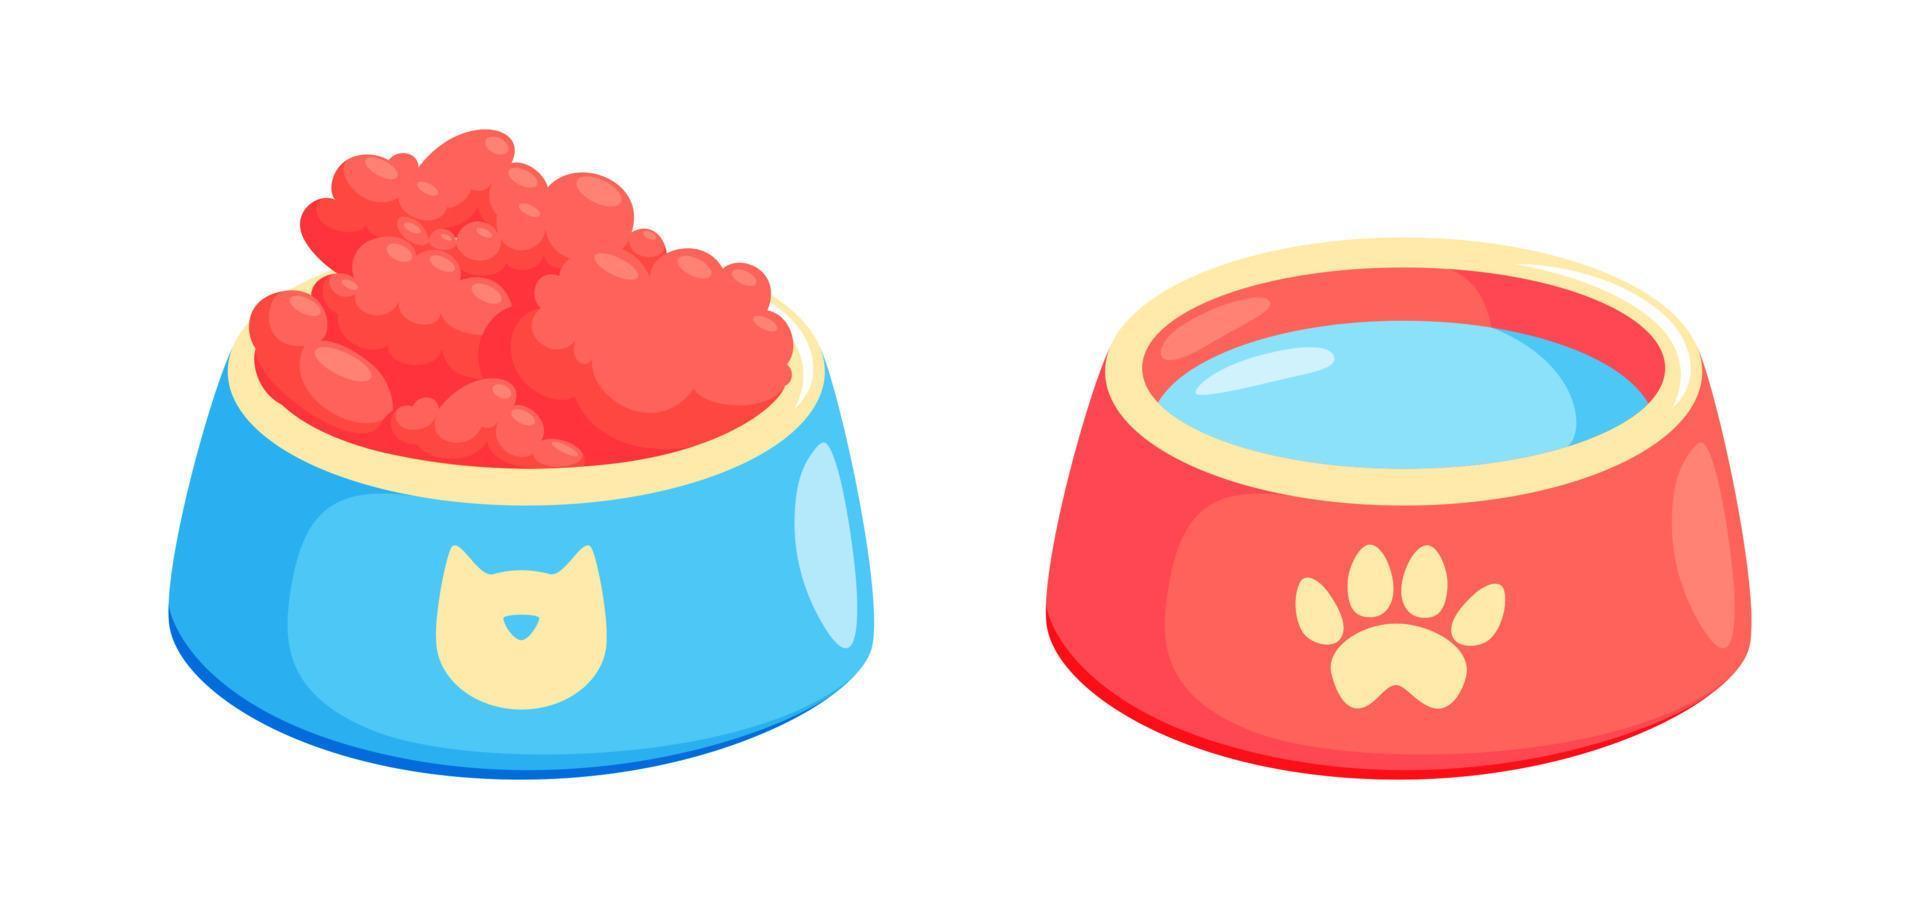 Pet bowl with food. Bowl for cat or dog for kibbles and water. Vector illustration